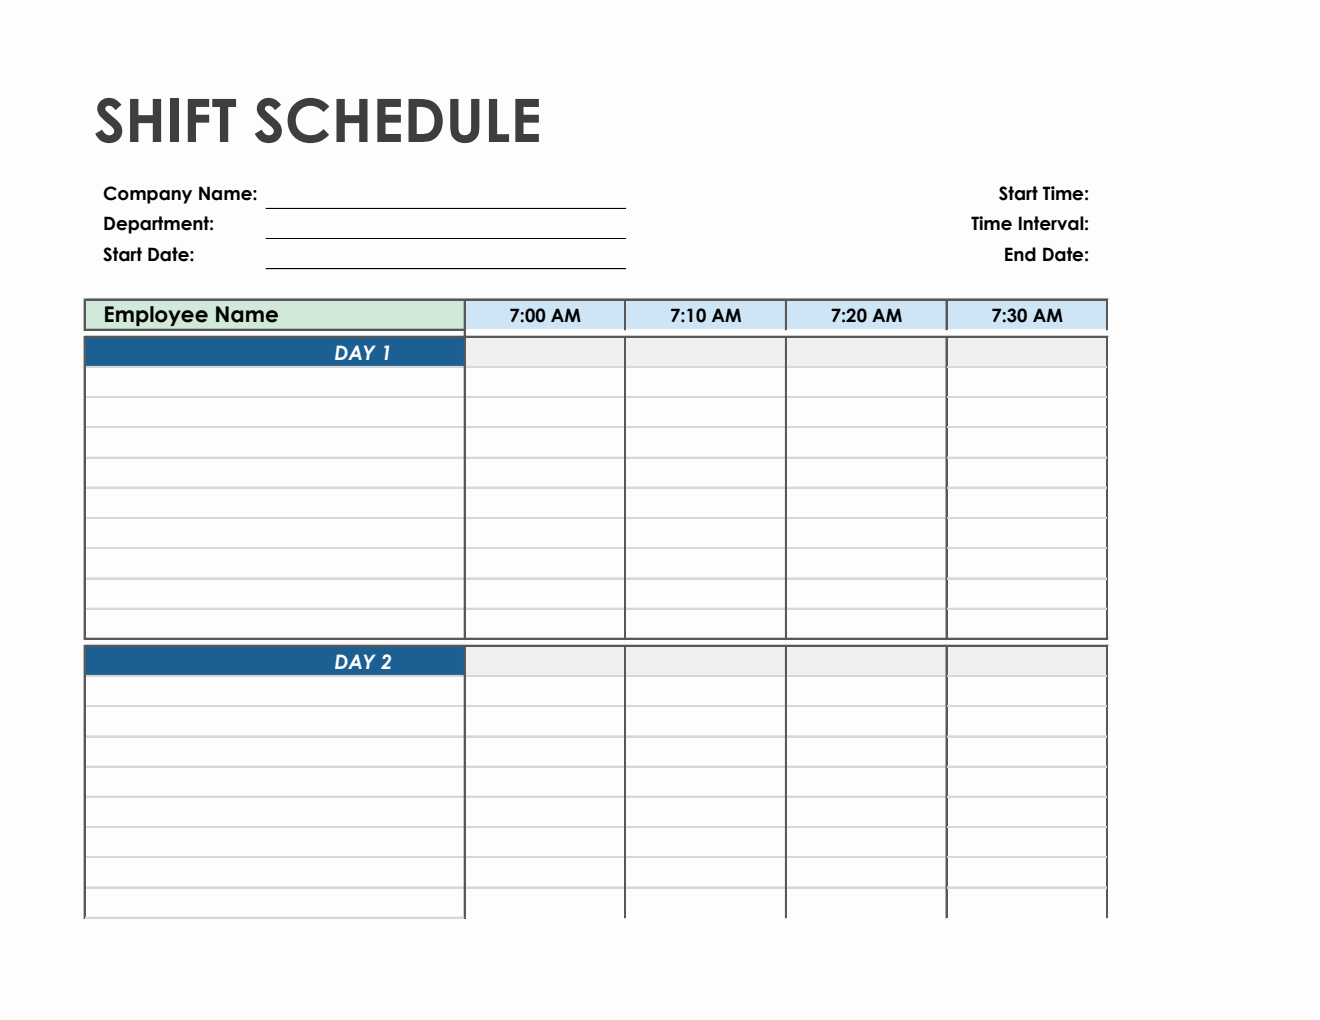 Shift Schedule Template in Excel